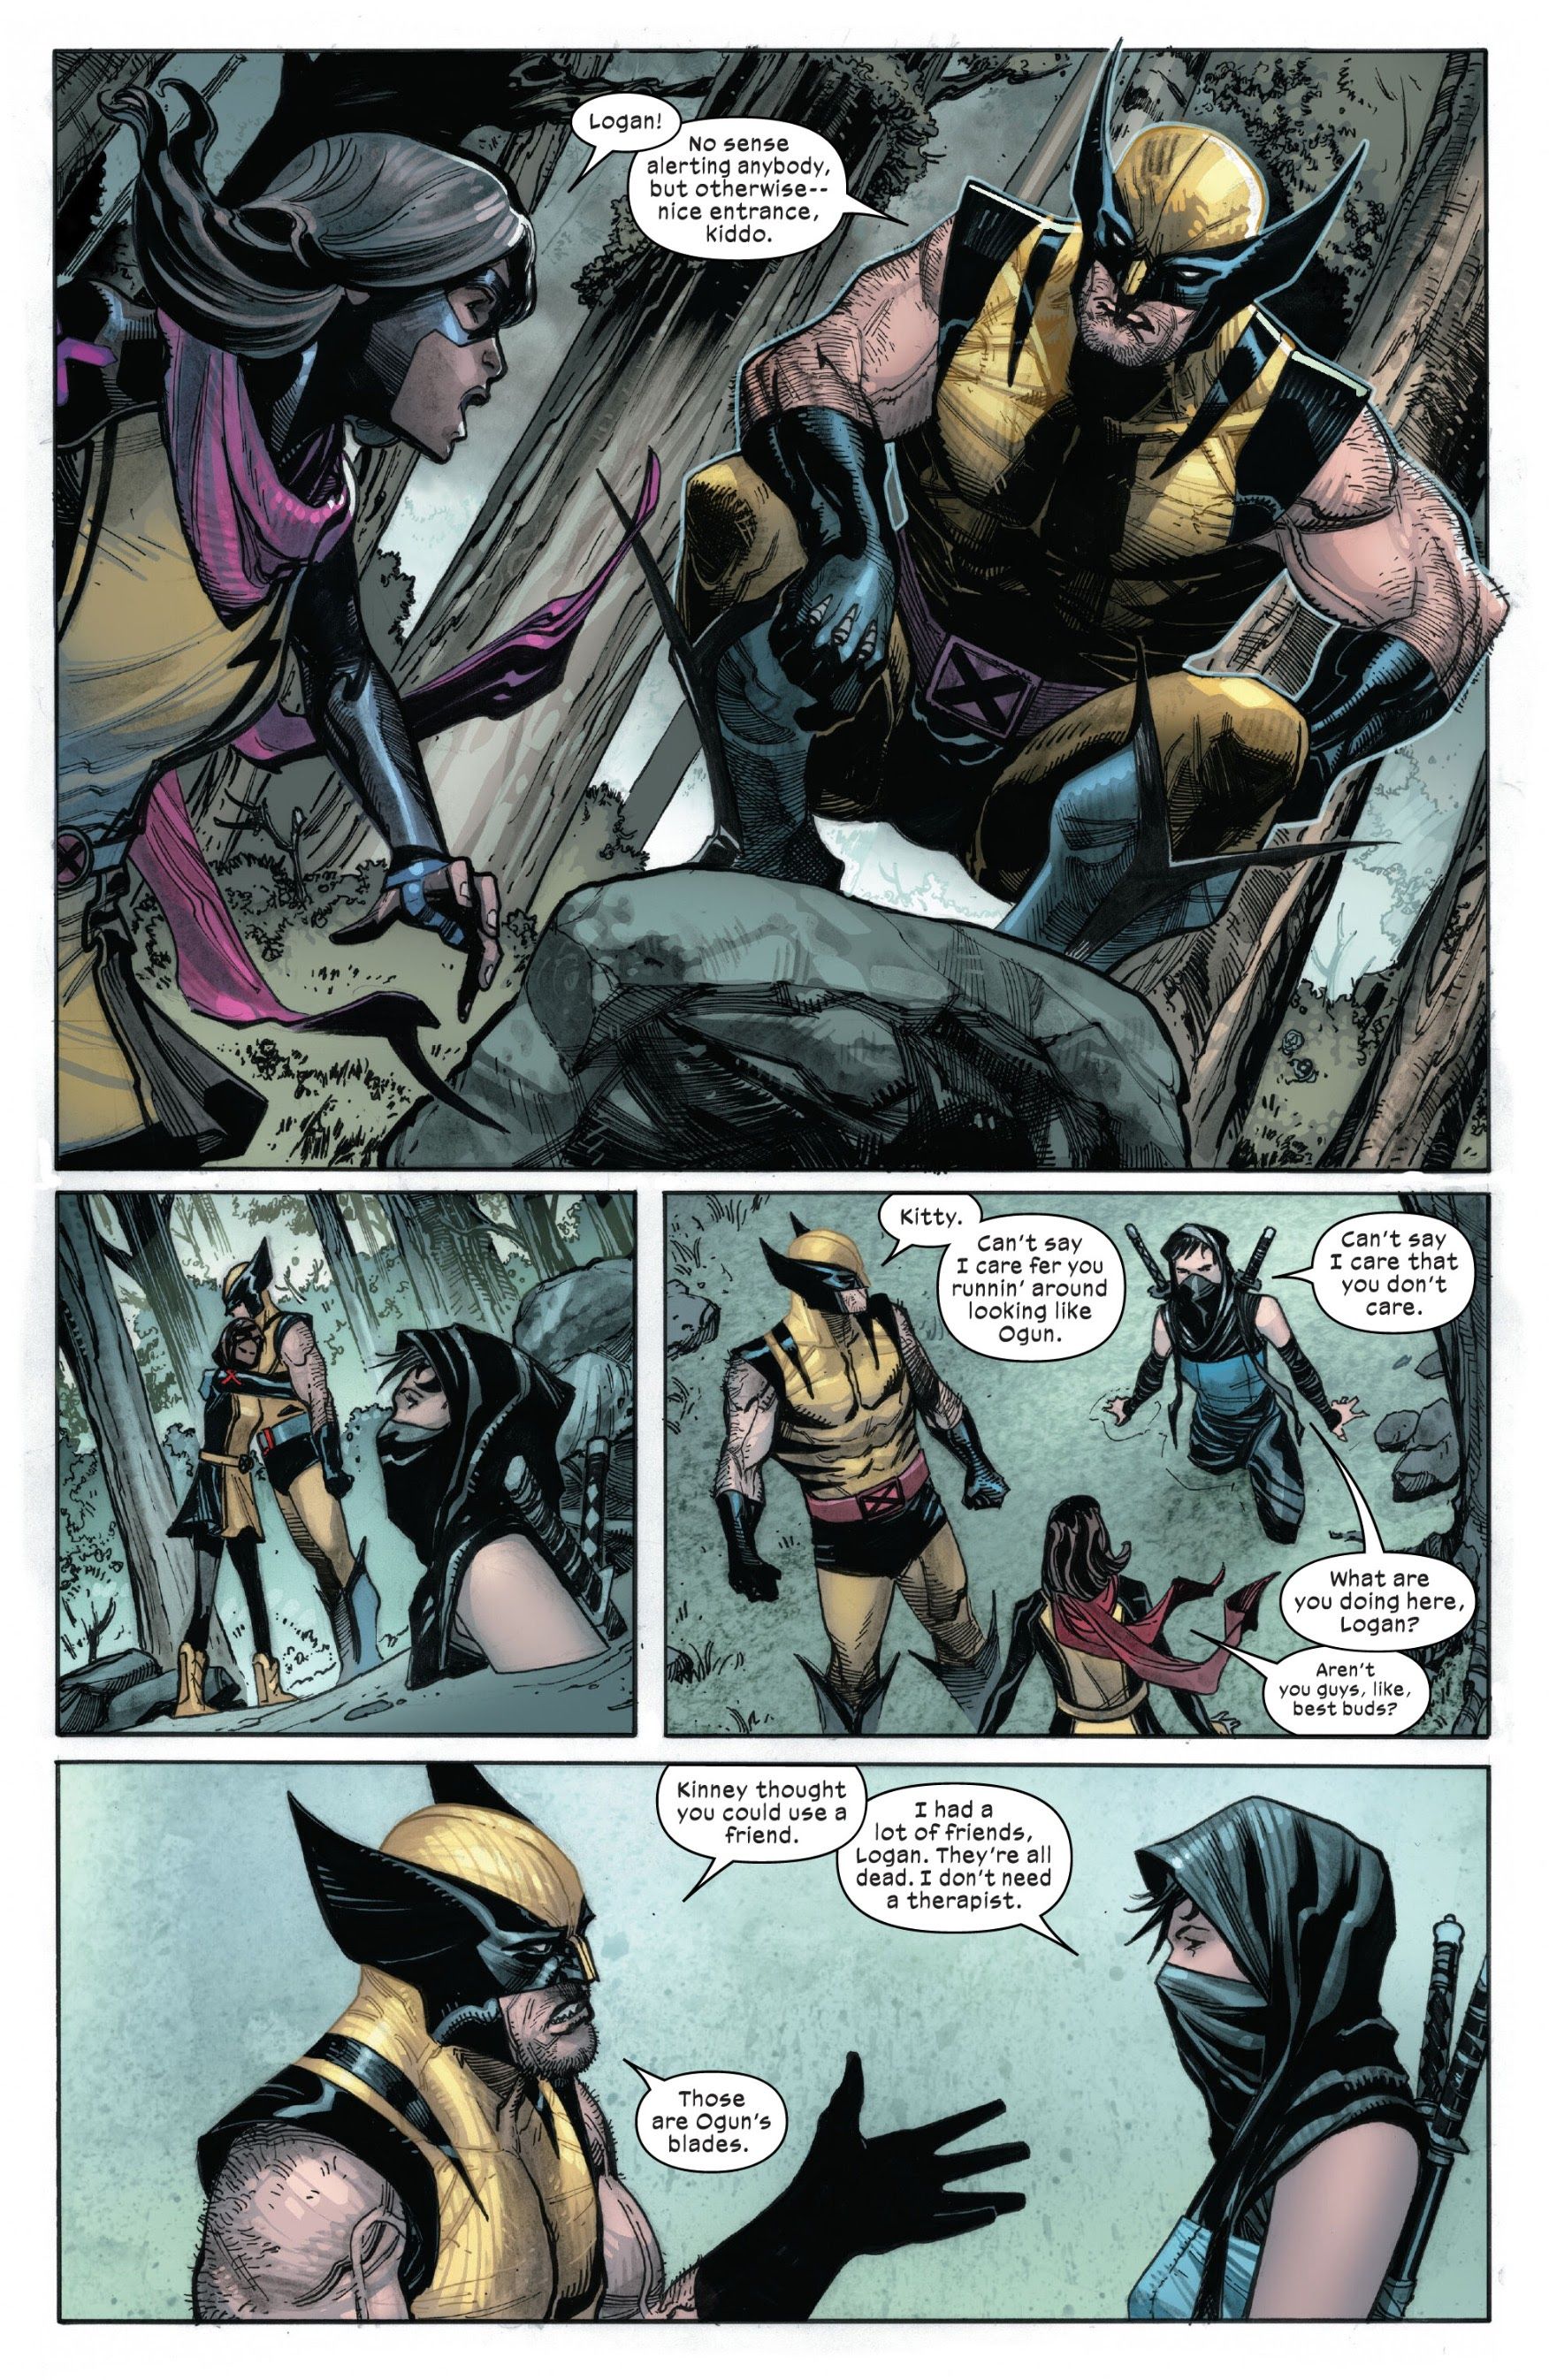 Wolverine meets up with Kitty Pryde